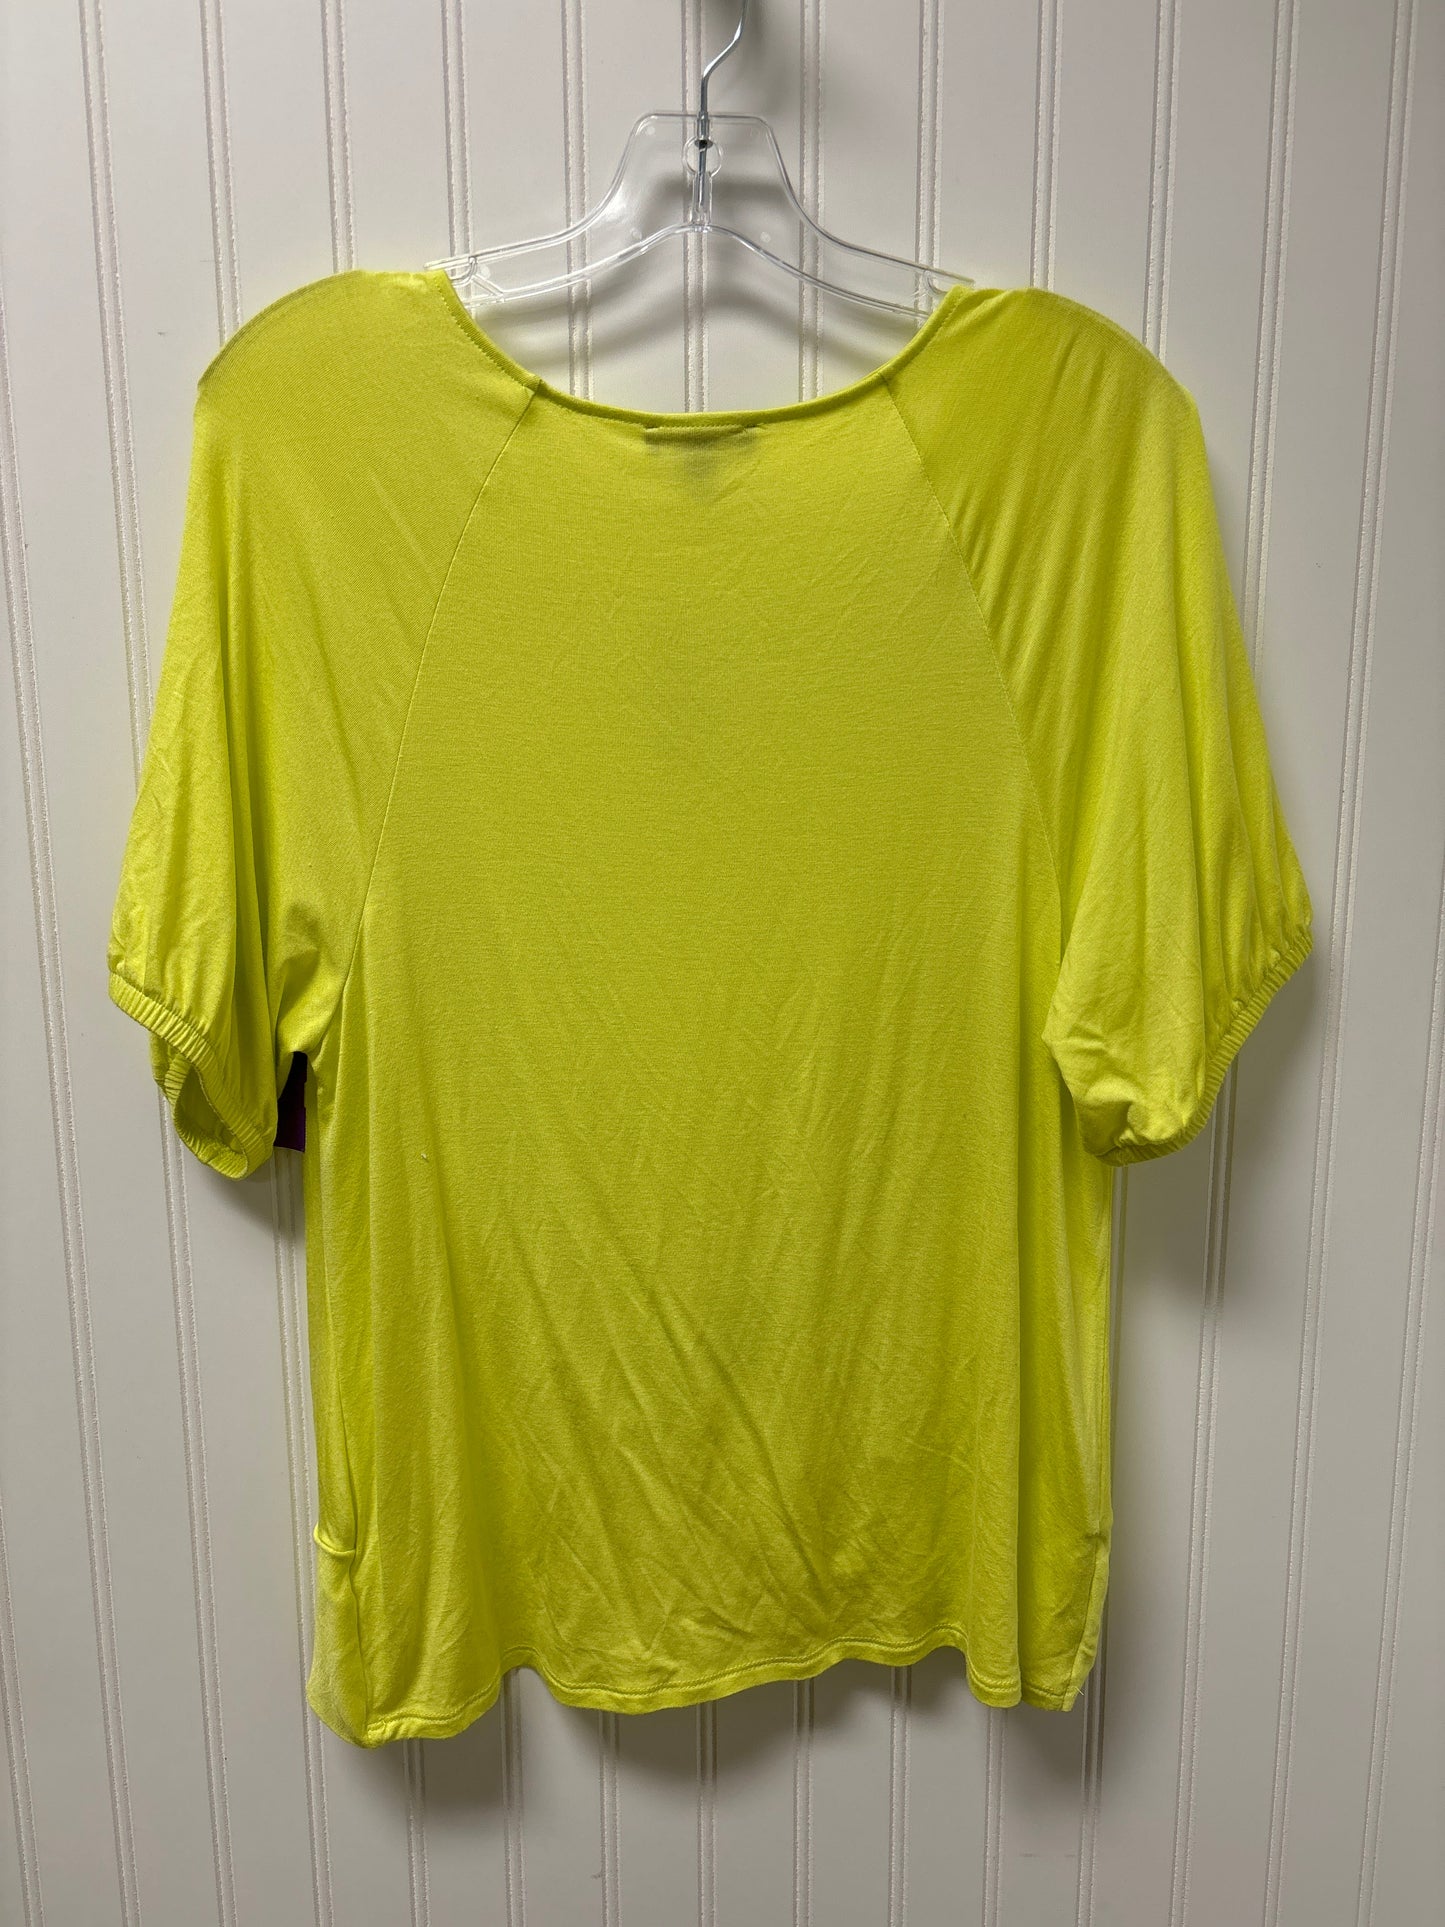 Yellow Top Short Sleeve Express, Size L